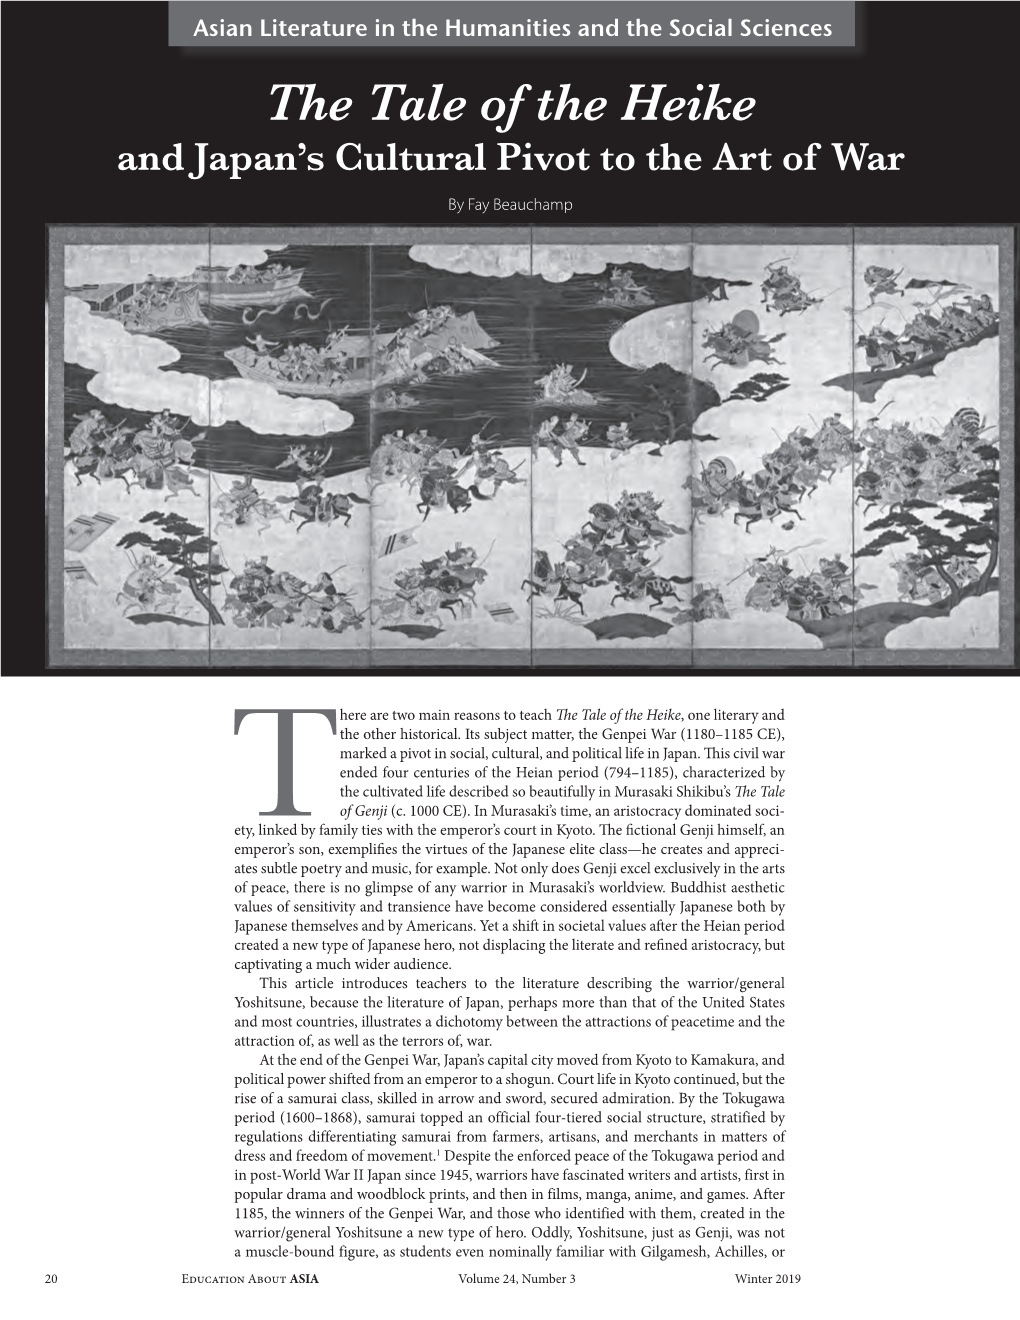 The Tale of the Heike and Japan’S Cultural Pivot to the Art of War by Fay Beauchamp